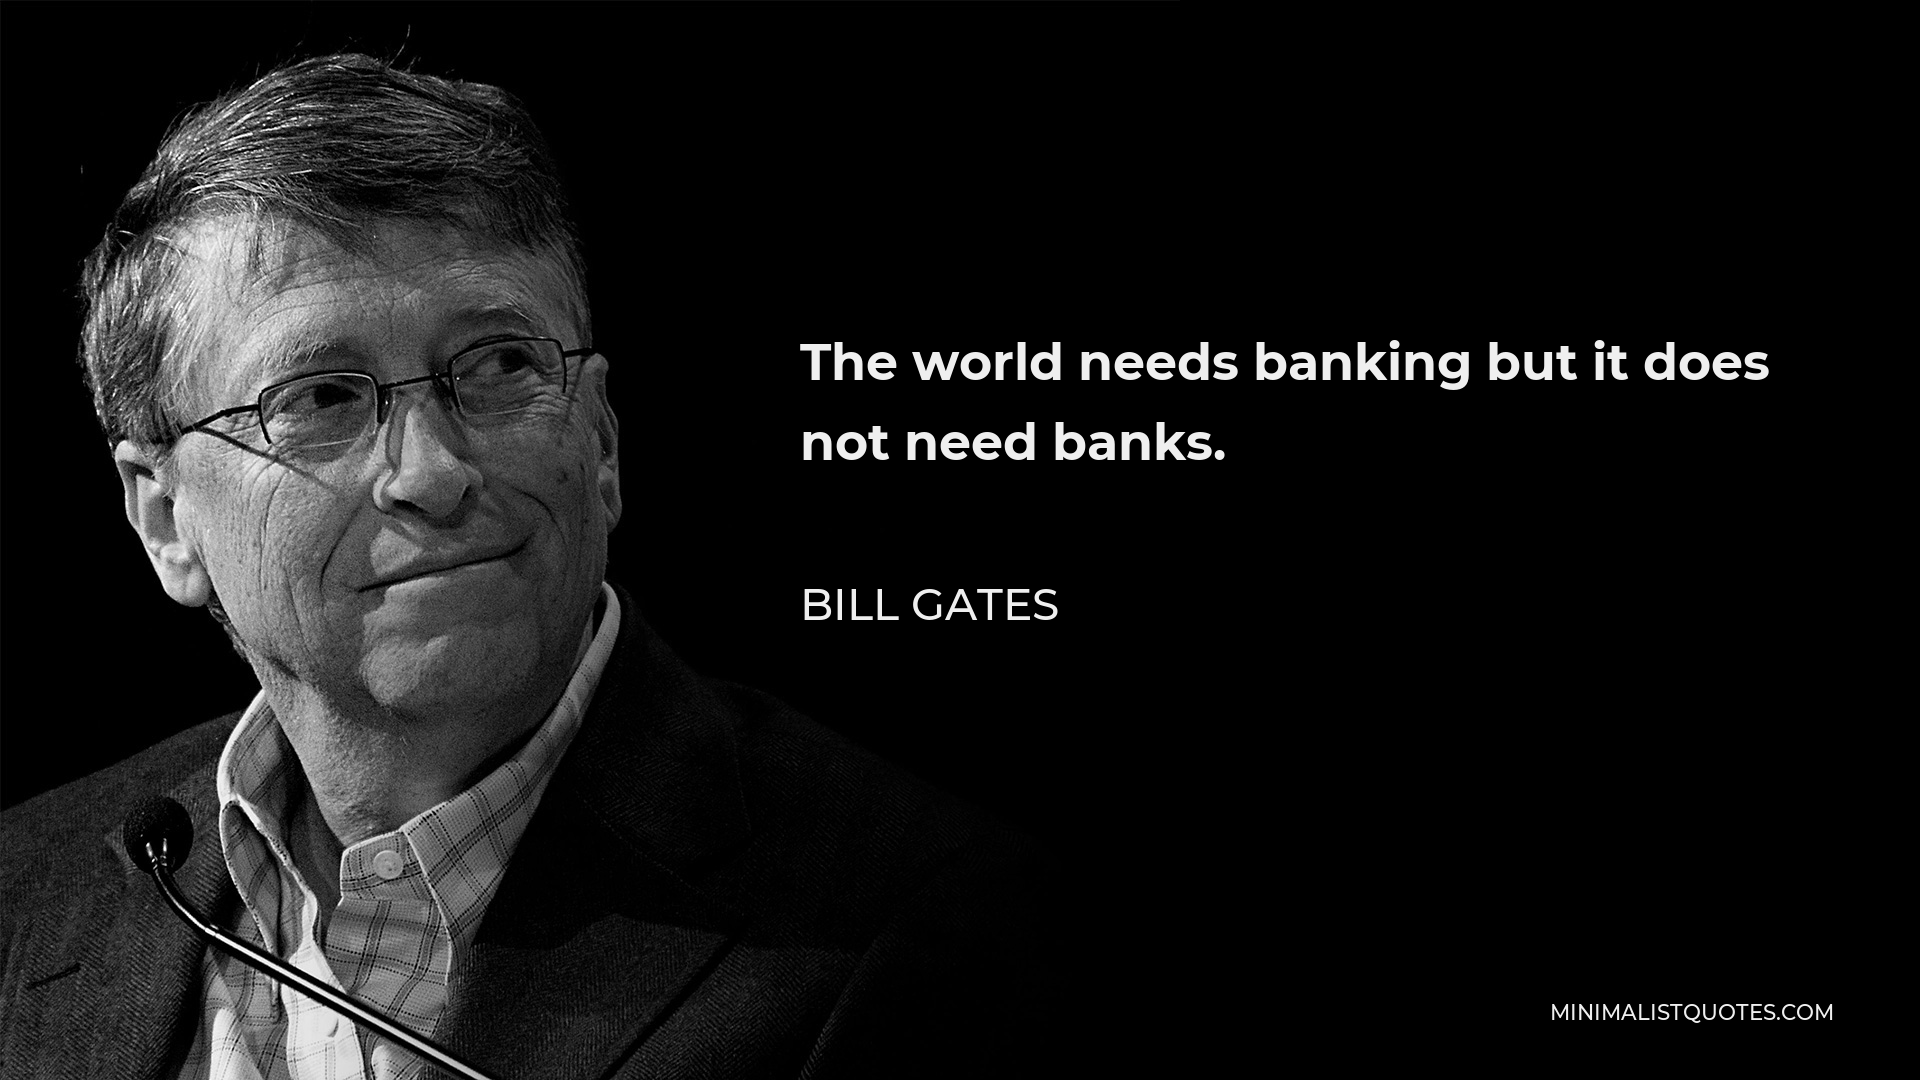 Bill Gates Quote: The world needs banking but it does not need banks.